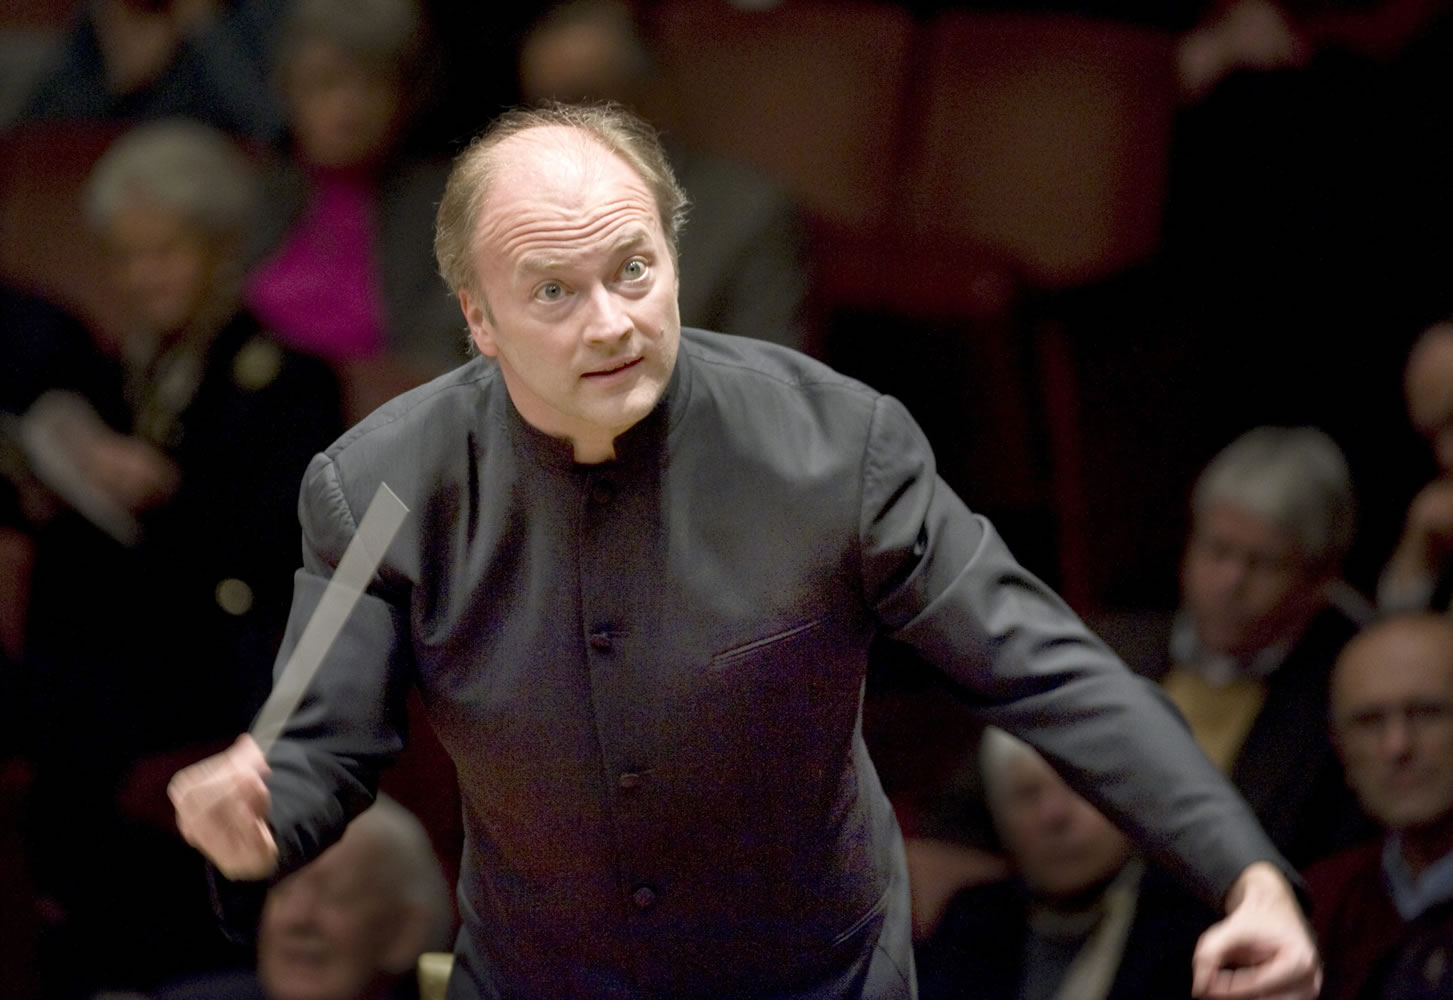 Gianandrea Noseda conducts Beethoven&#039;s Piano Concerto No. 3 at the Kennedy Center in February 2011 in Washington, D.C. Noseda has been named music director of the National Symphony Orchestra.